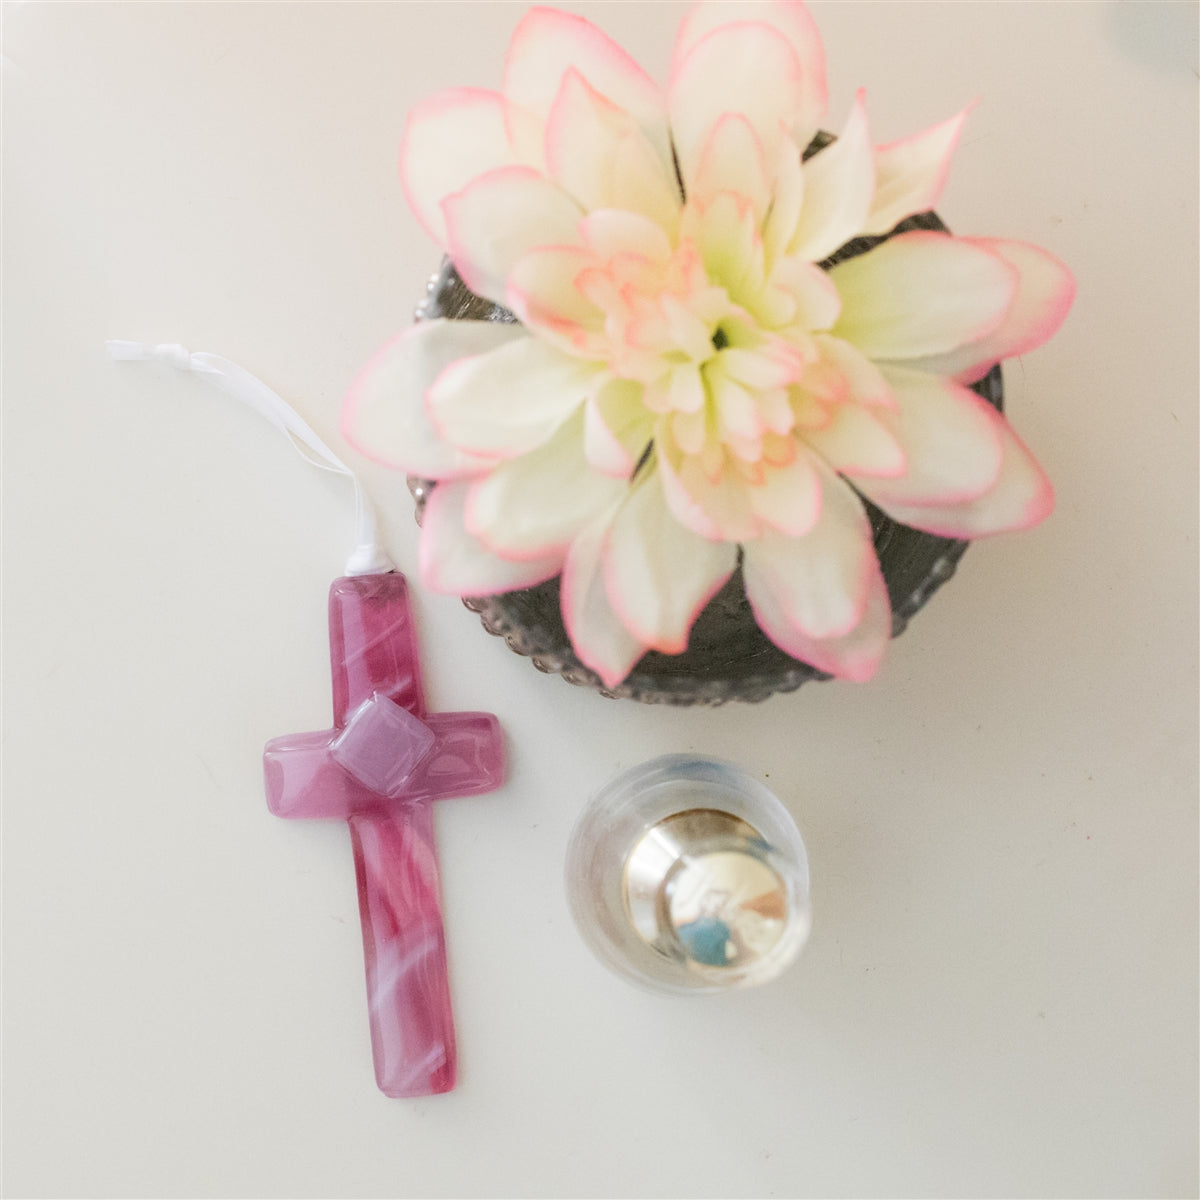 Pink glass Cross with white satin ribbon for hanging.